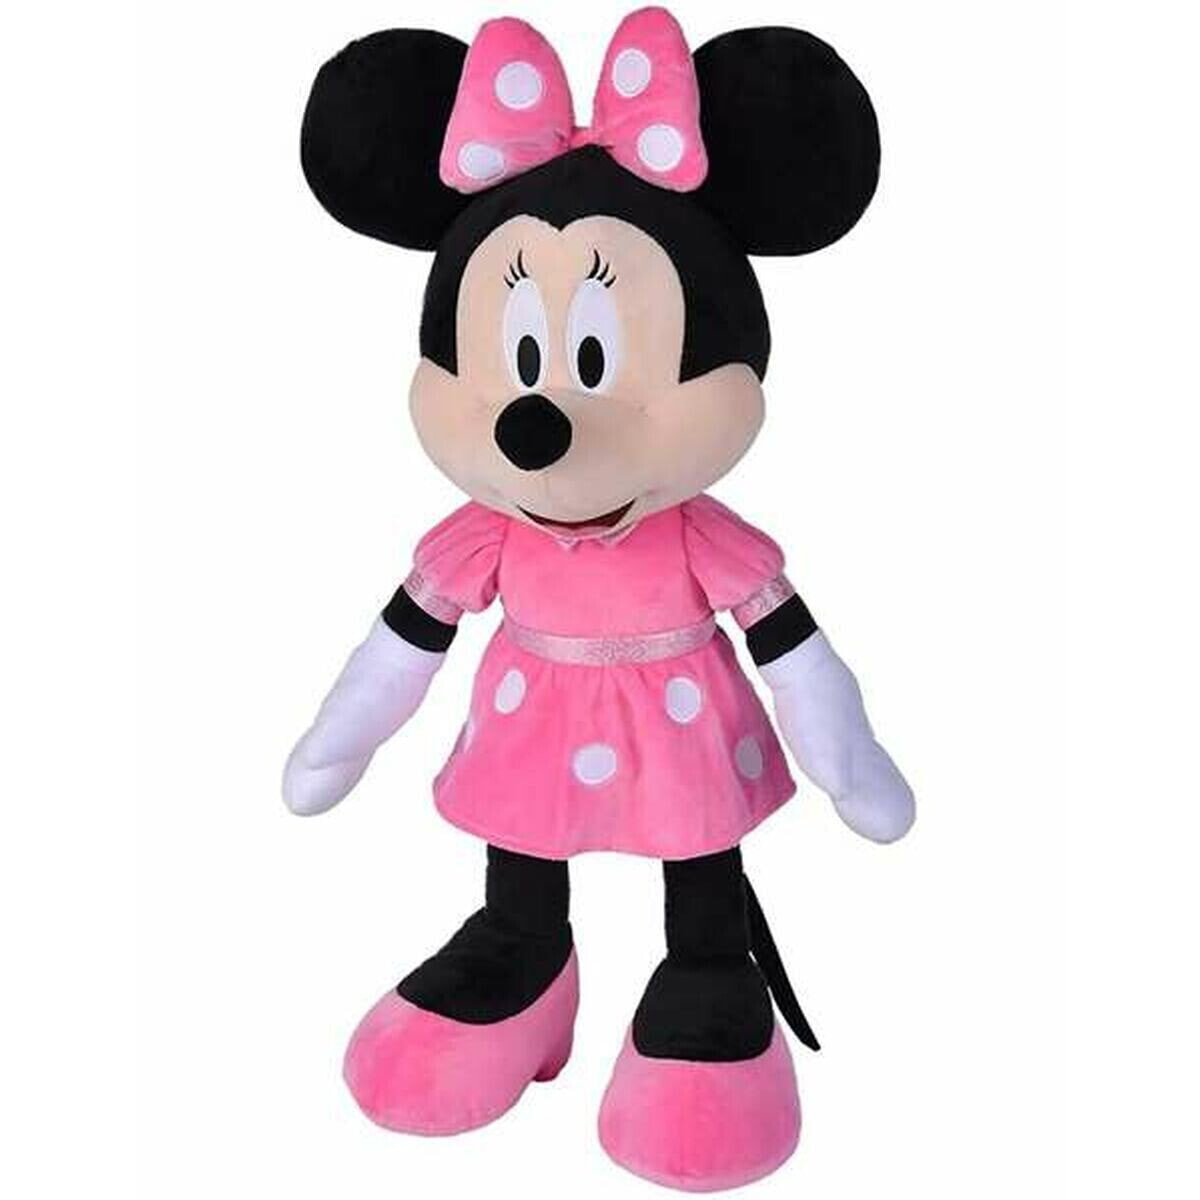 Fluffy toy Minnie Mouse 61 cm